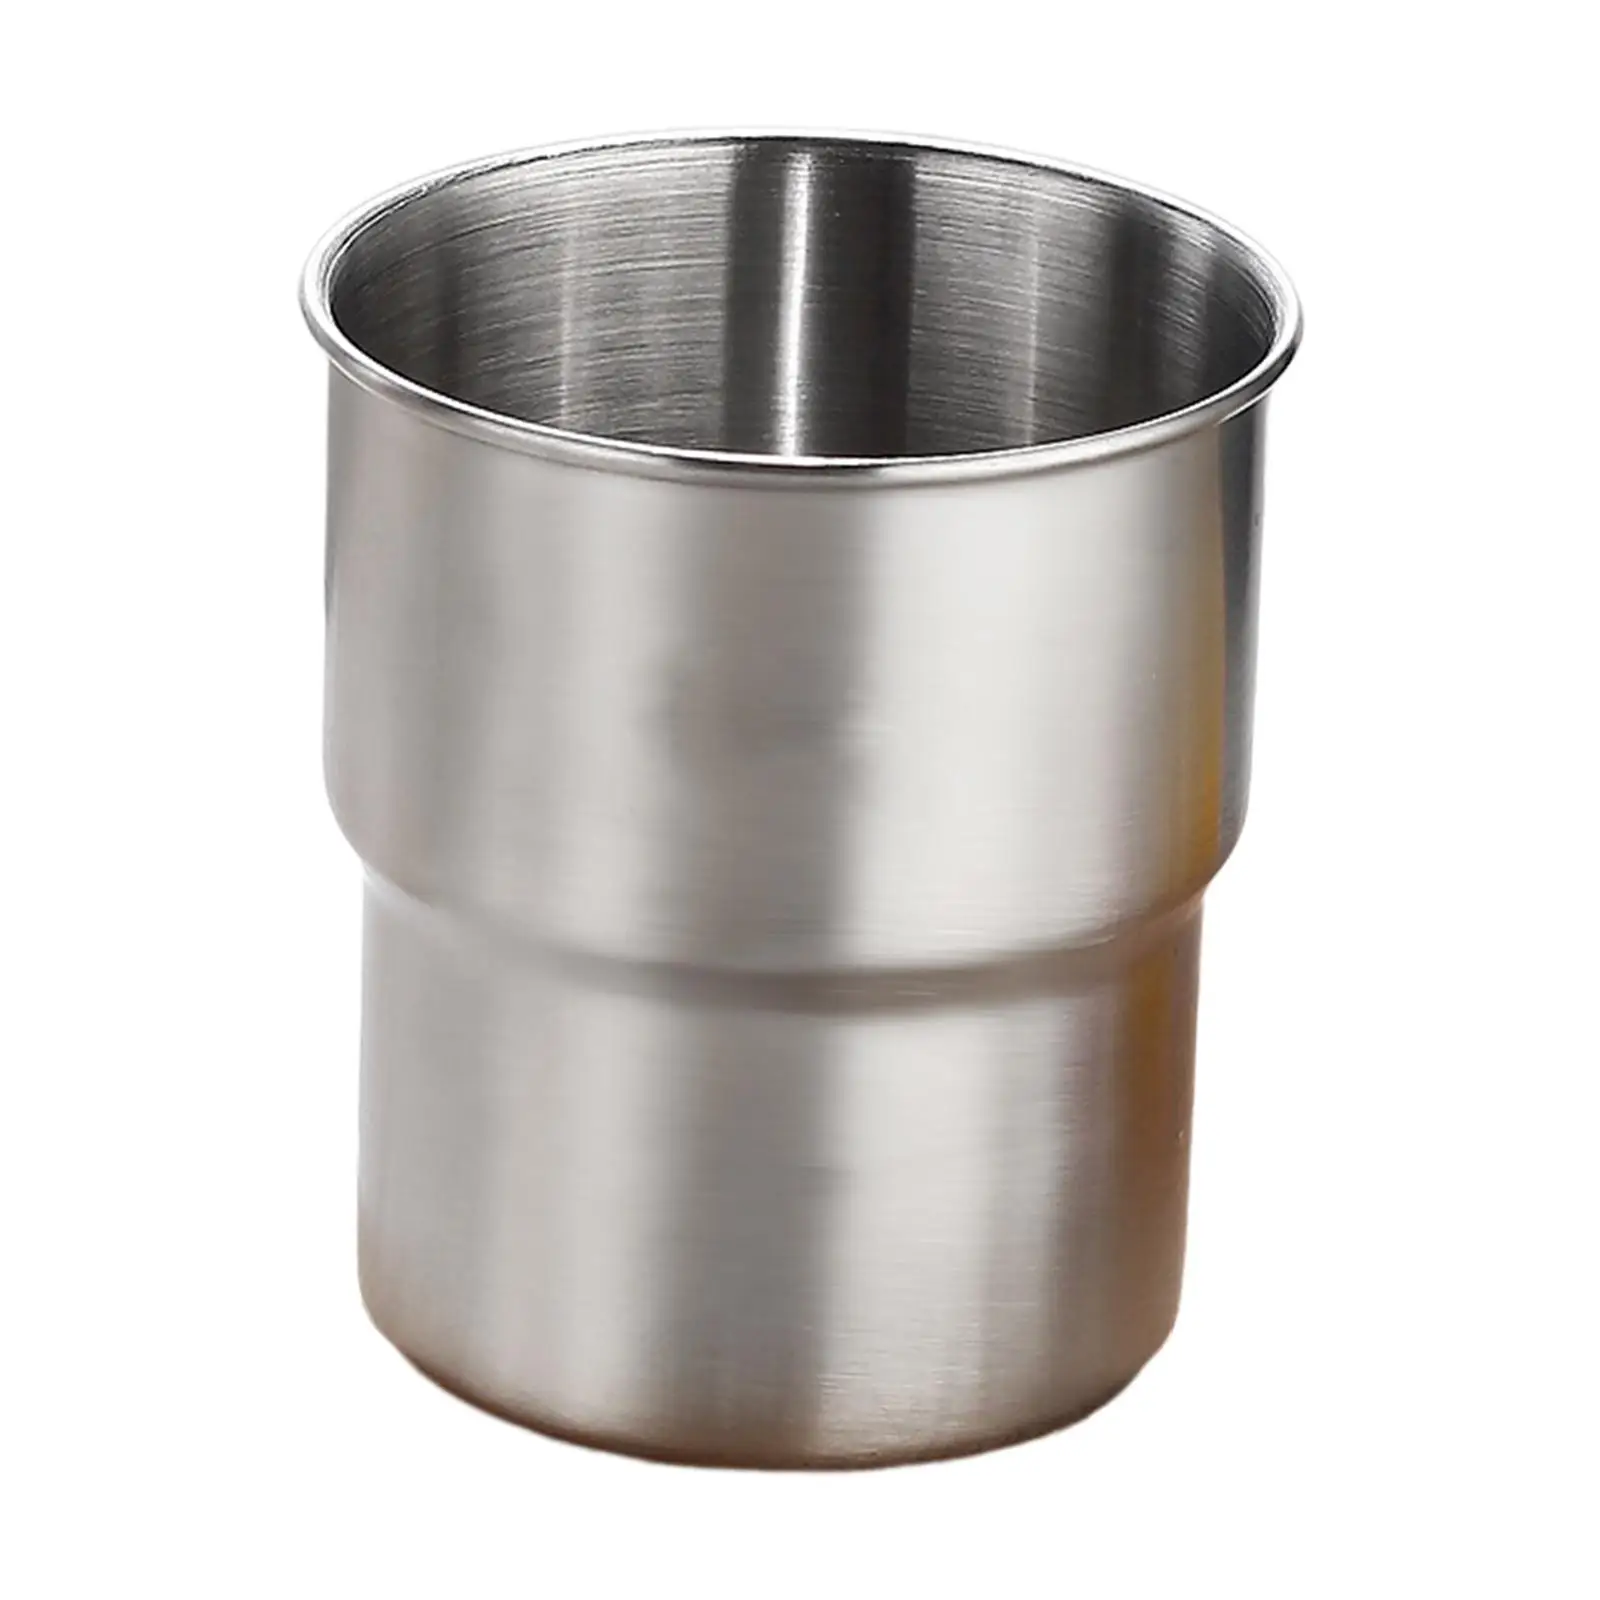 Stainless Steel Cup 300ml Drinking Tumblers Premium Metal Drinking Glasses Beer Cups for Picnic Travel Restaurant Camping